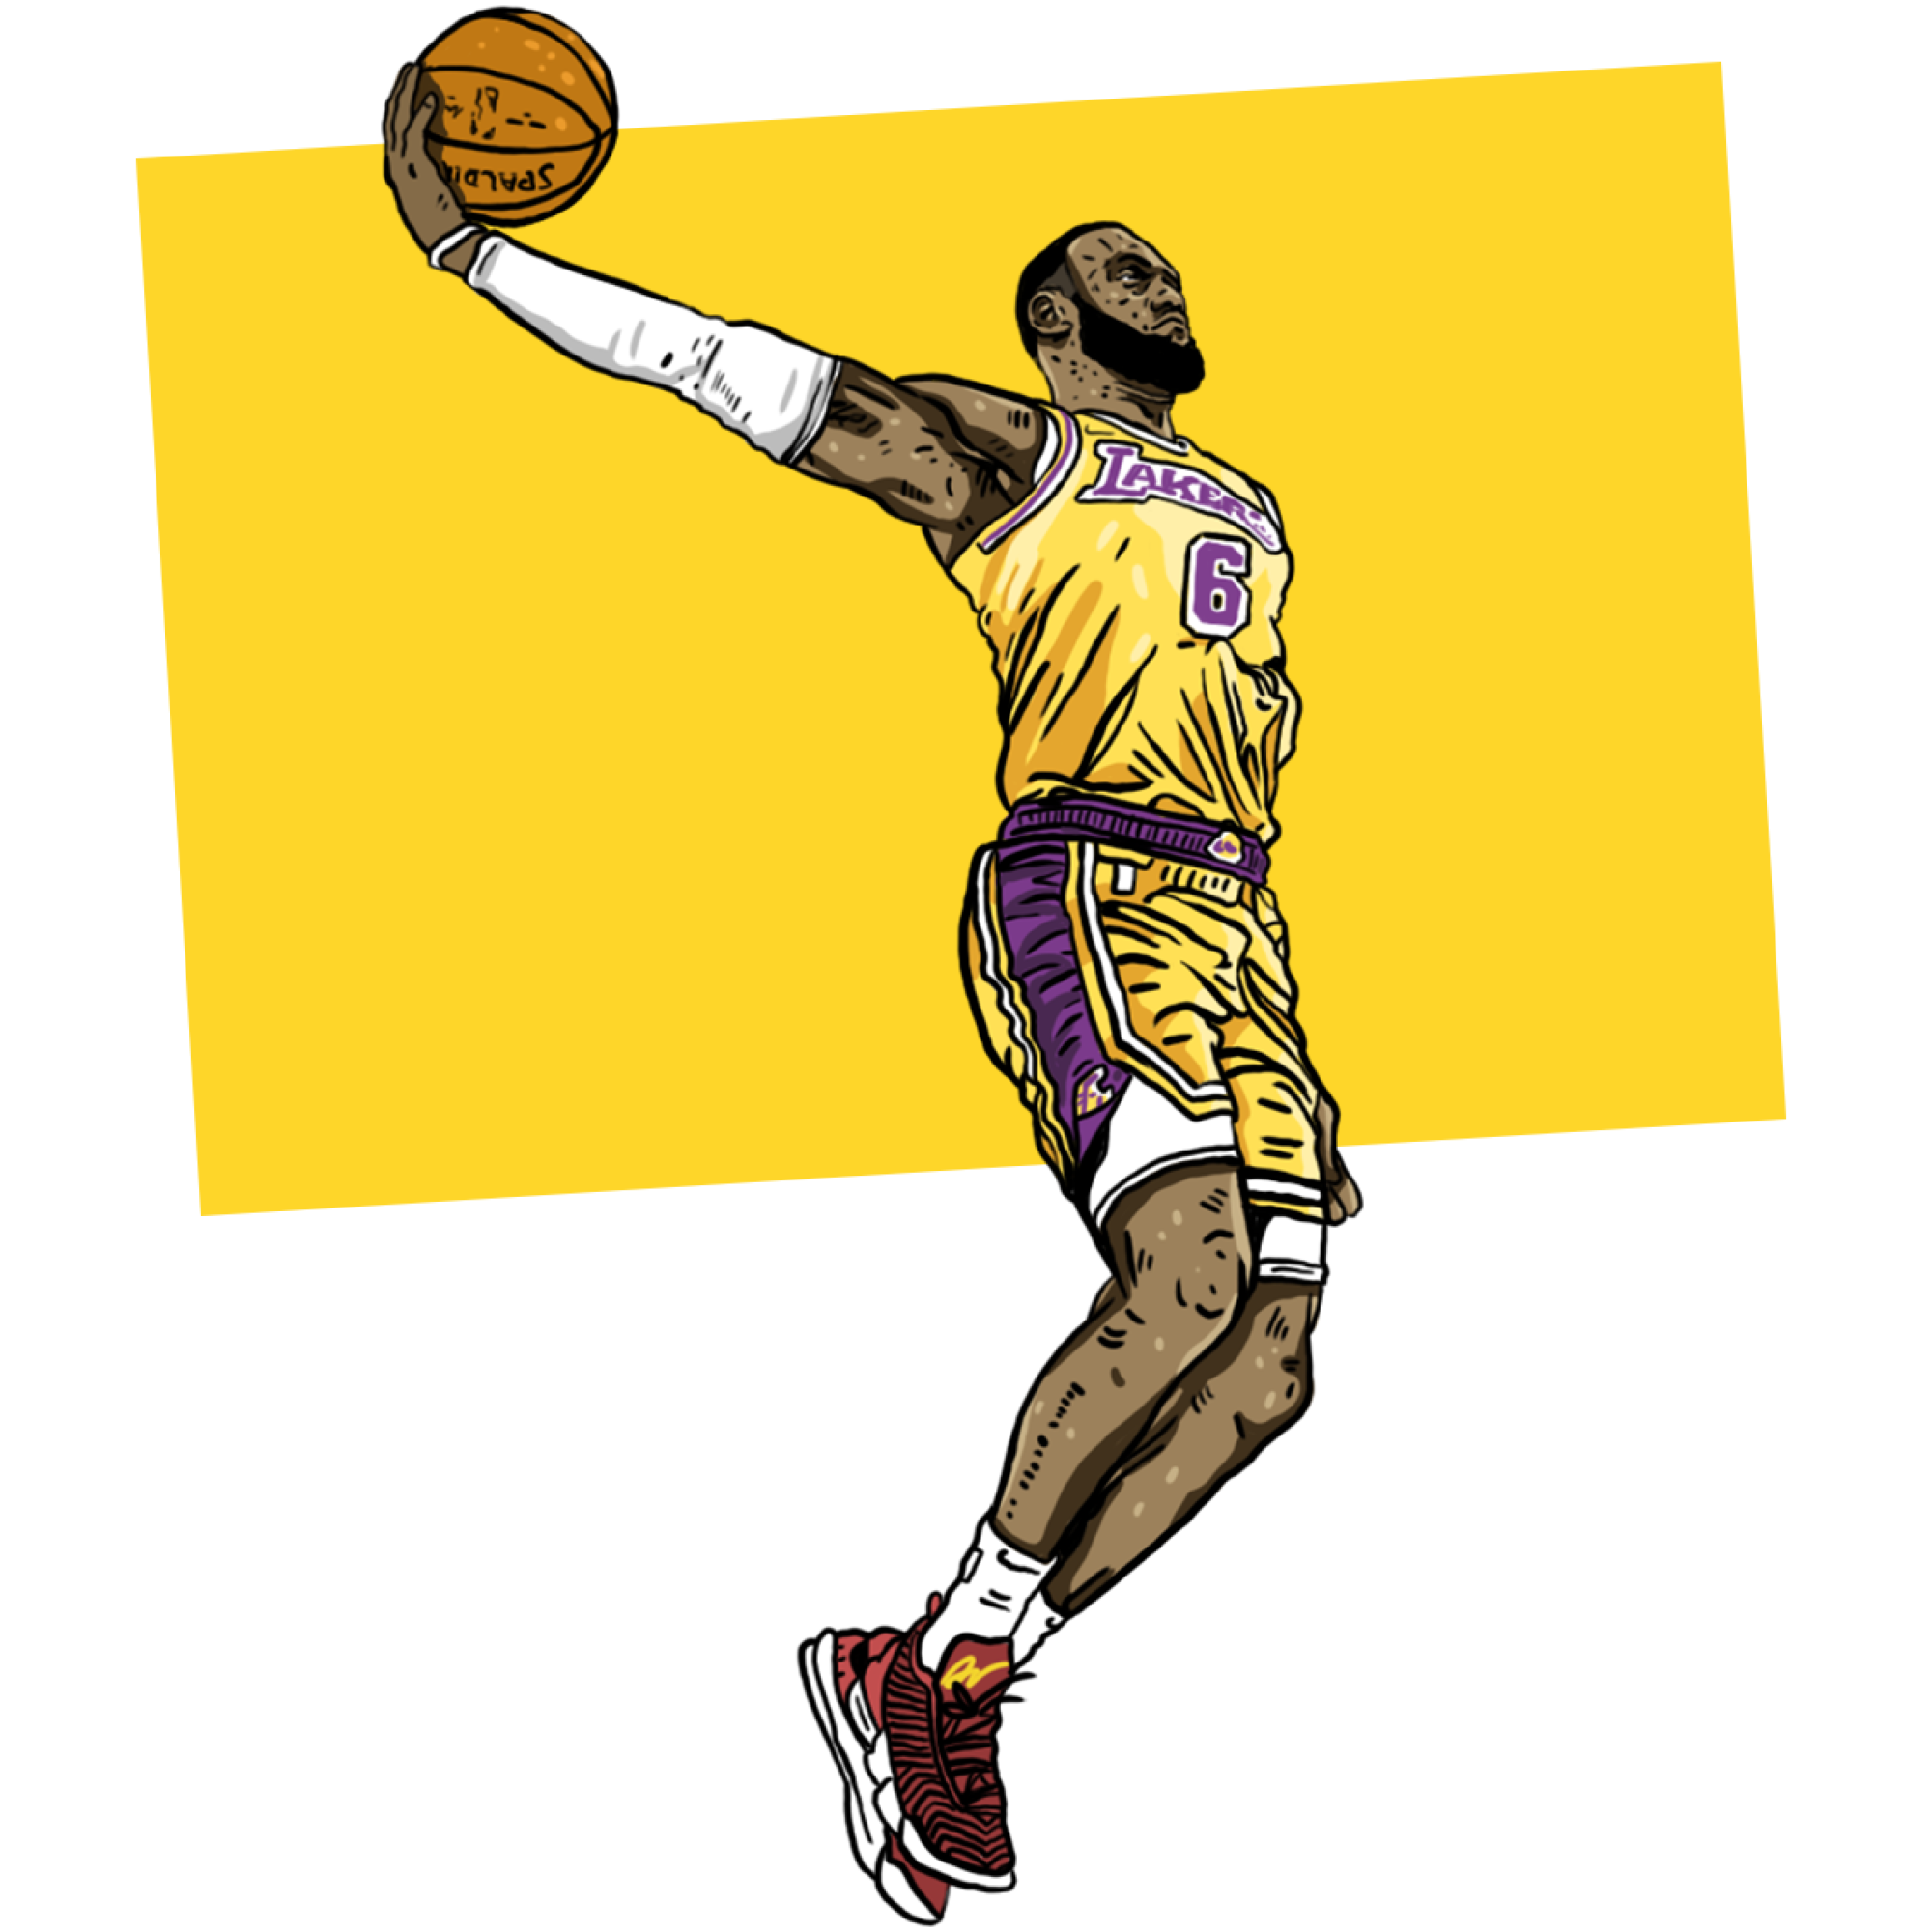 Illustration of LeBron James in a yellow #6 jersey jumping up with a ball in his right hand.